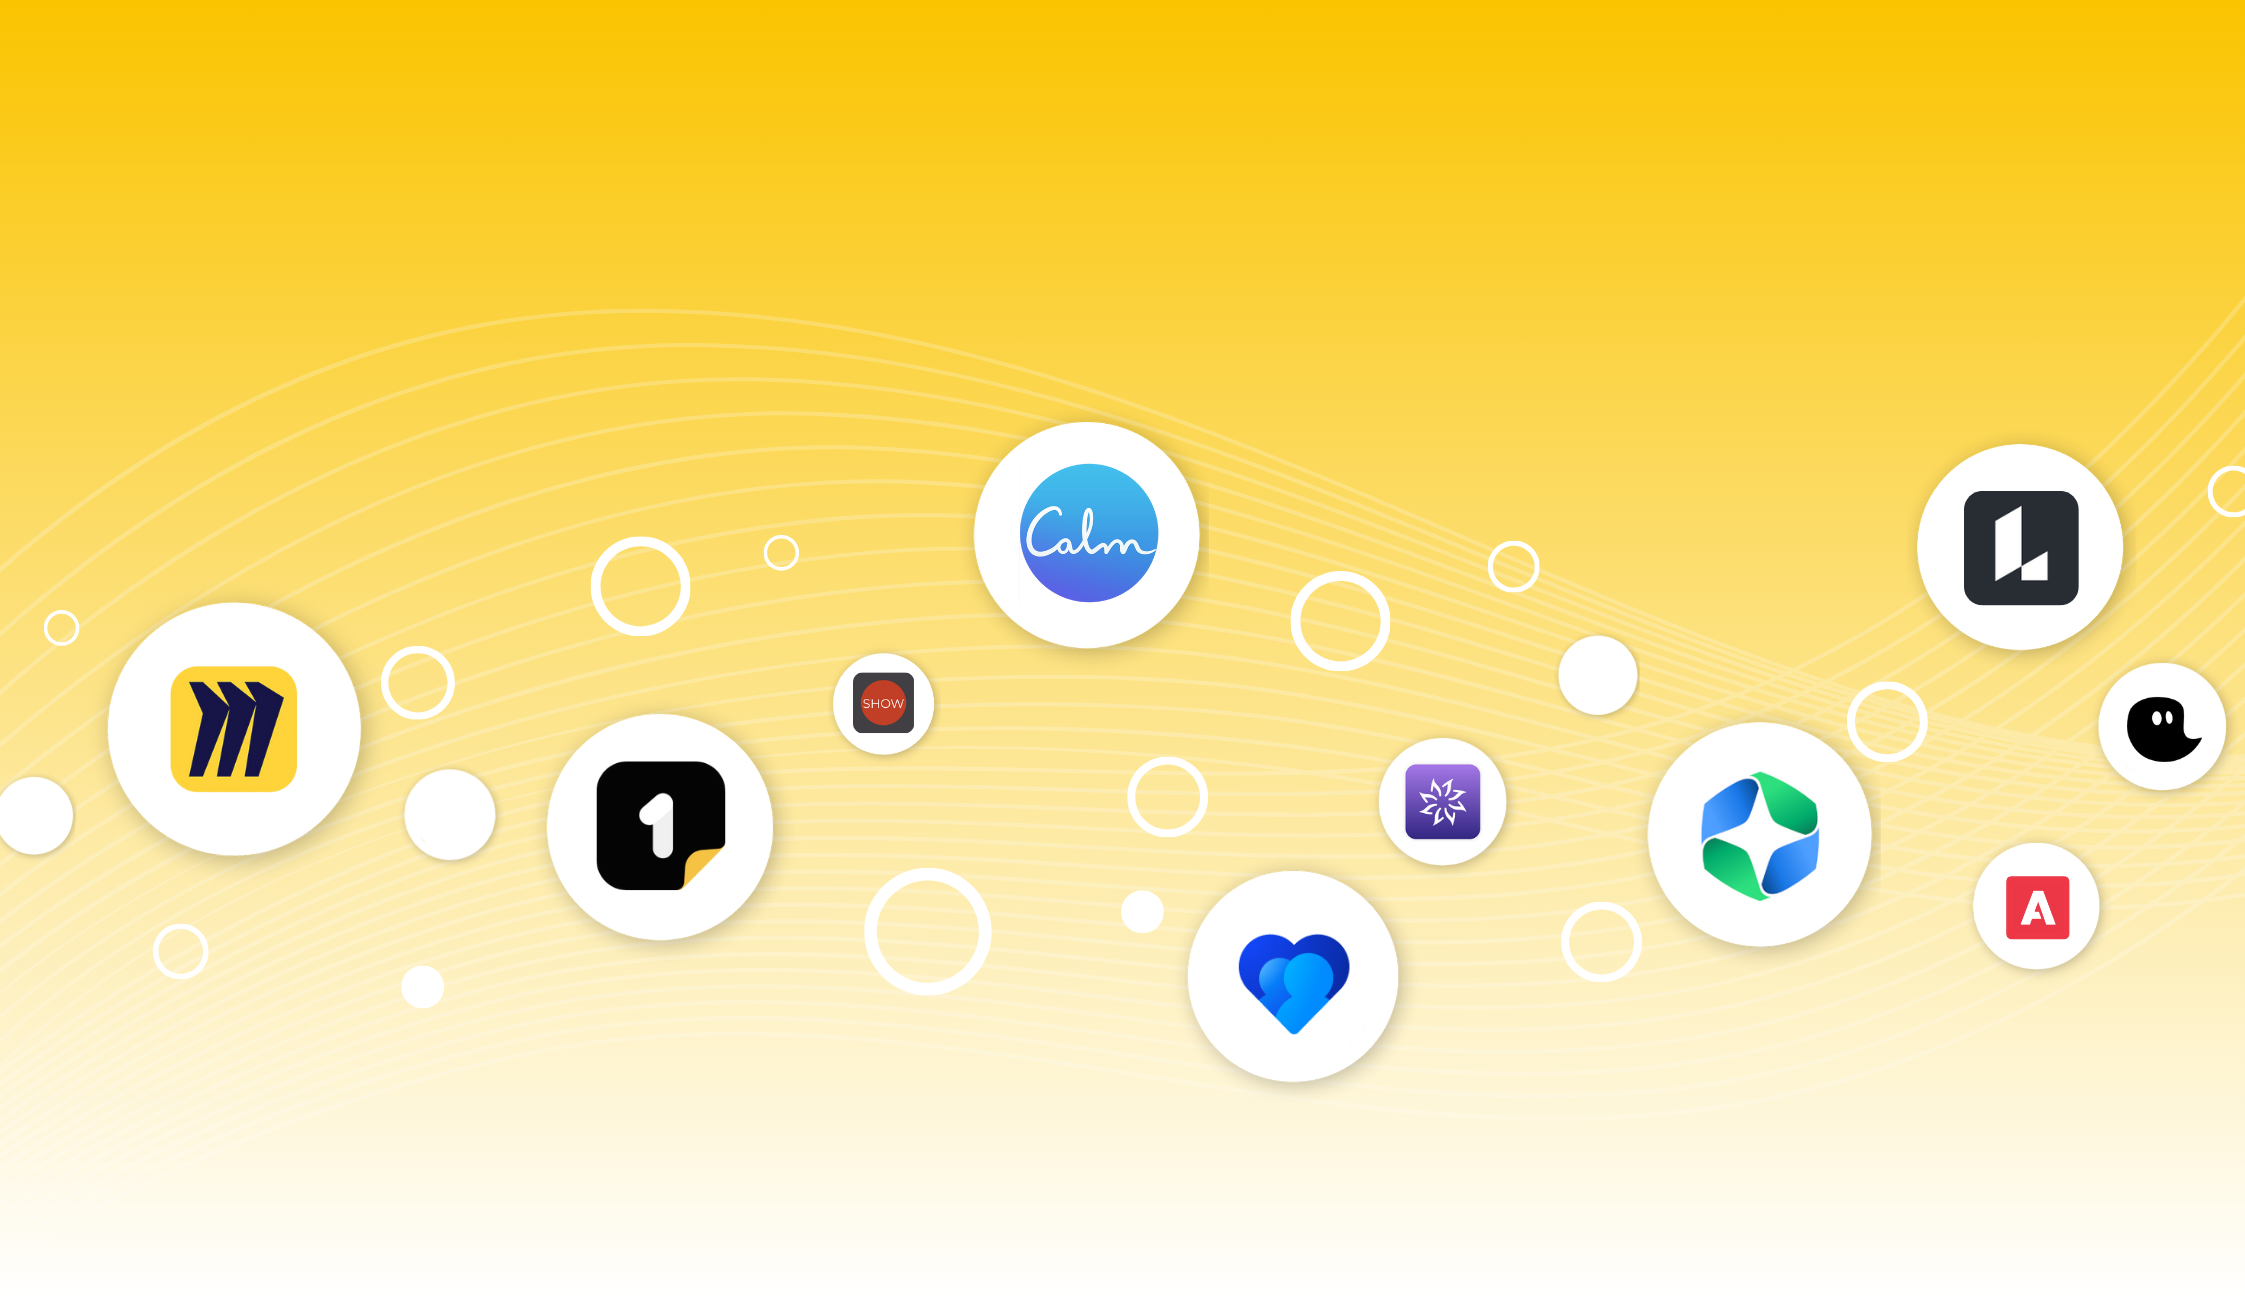 App logos on circles, the apps in the circles are, Miro, Vantage rewards, Calm, Timeghost, 1Page, Alvao, Showmaster, Lucis AI, GoBright and SAP Success Factors.